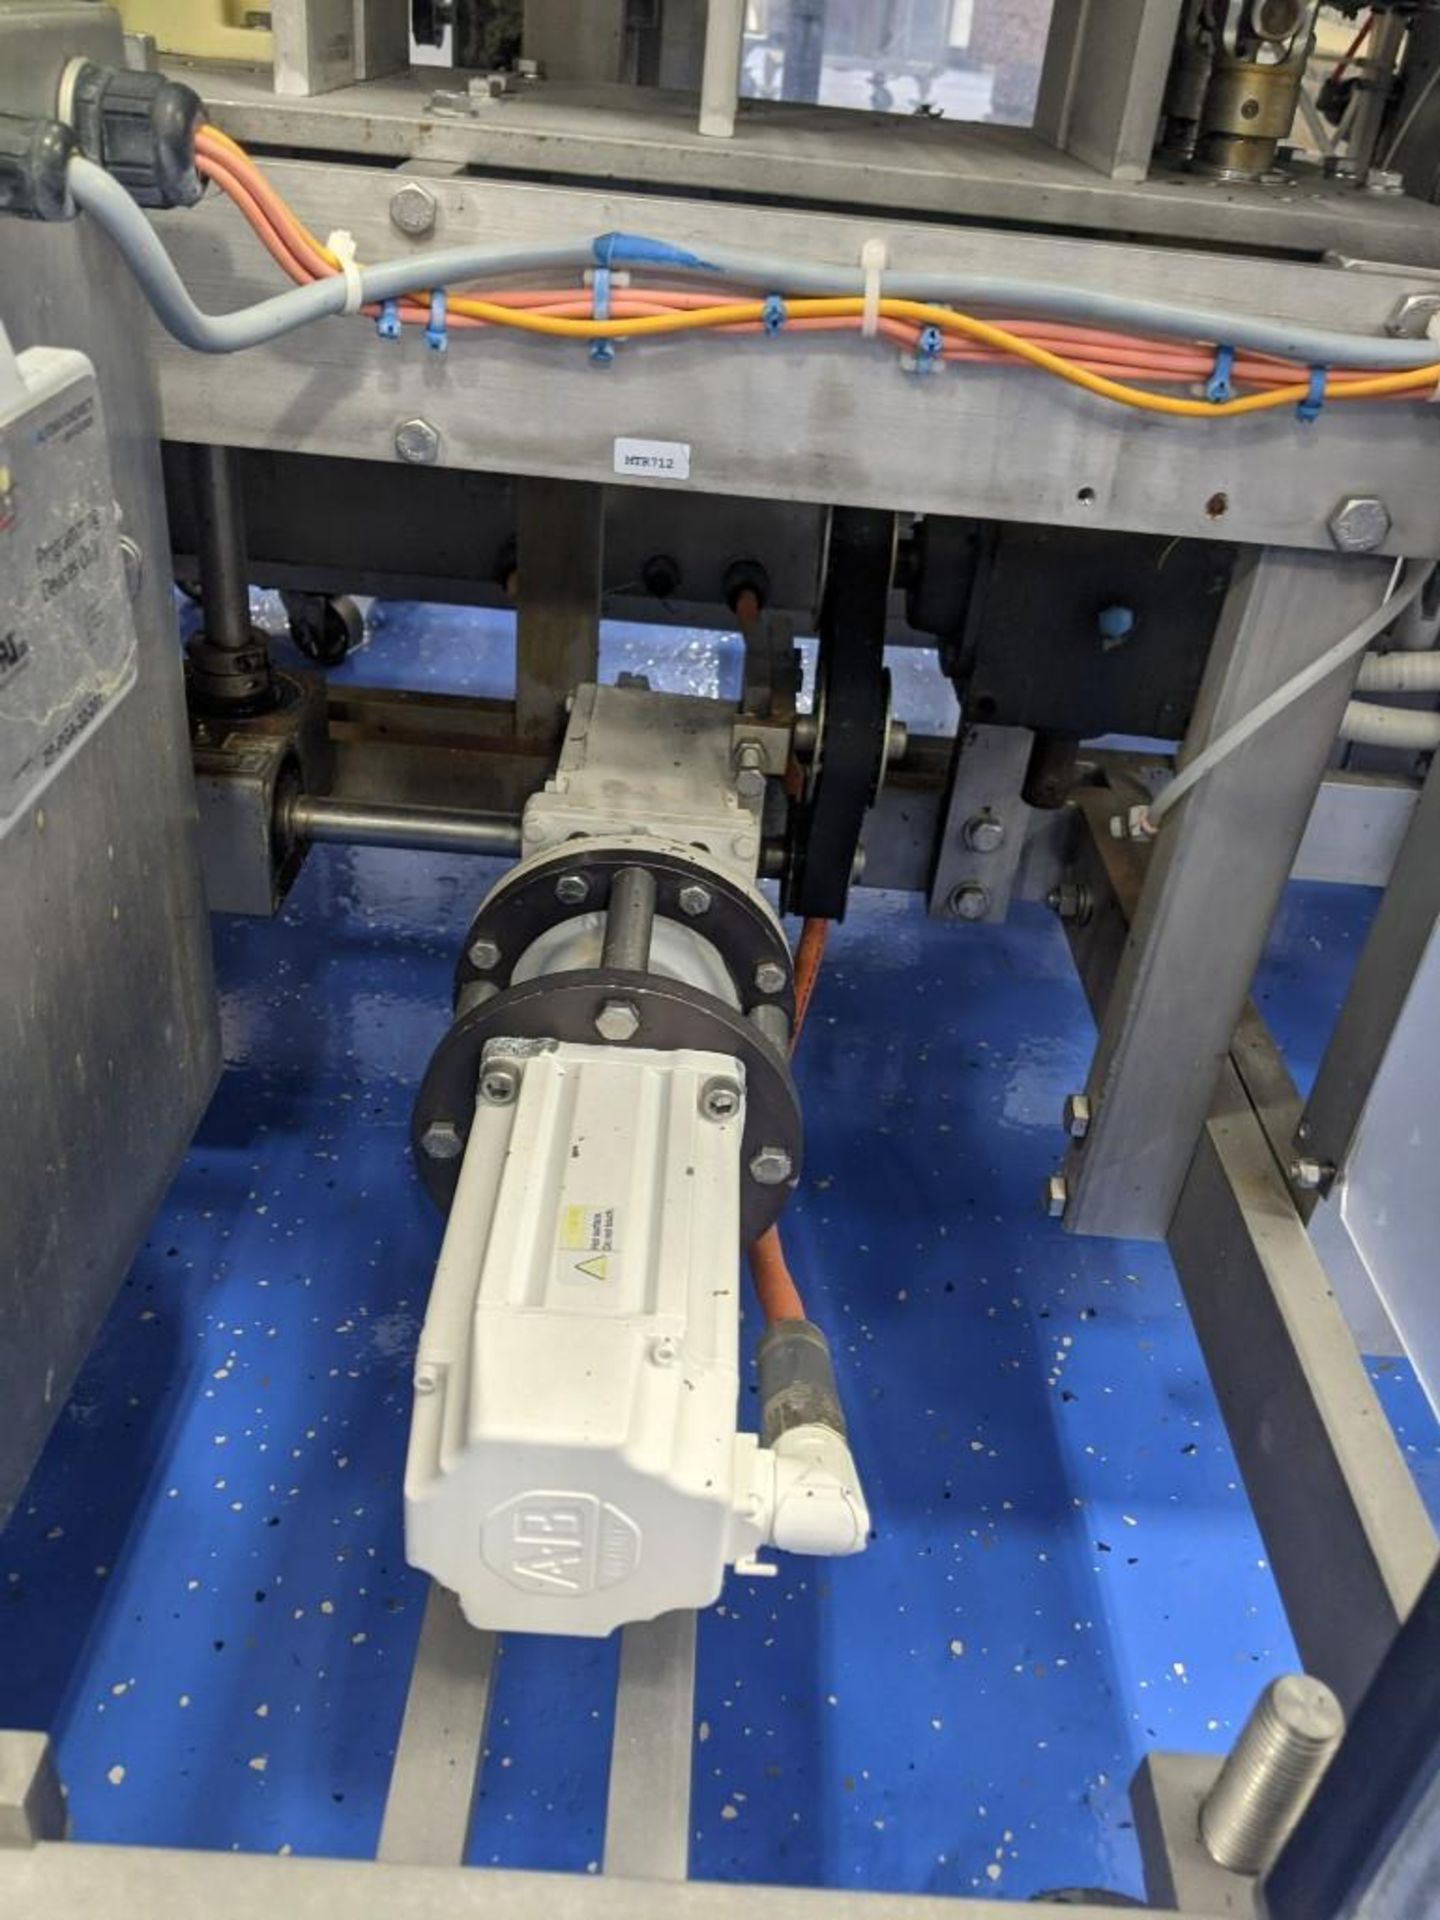 Massman HFFS-IM0800 Flexible Pouch Packaging System - Image 13 of 51